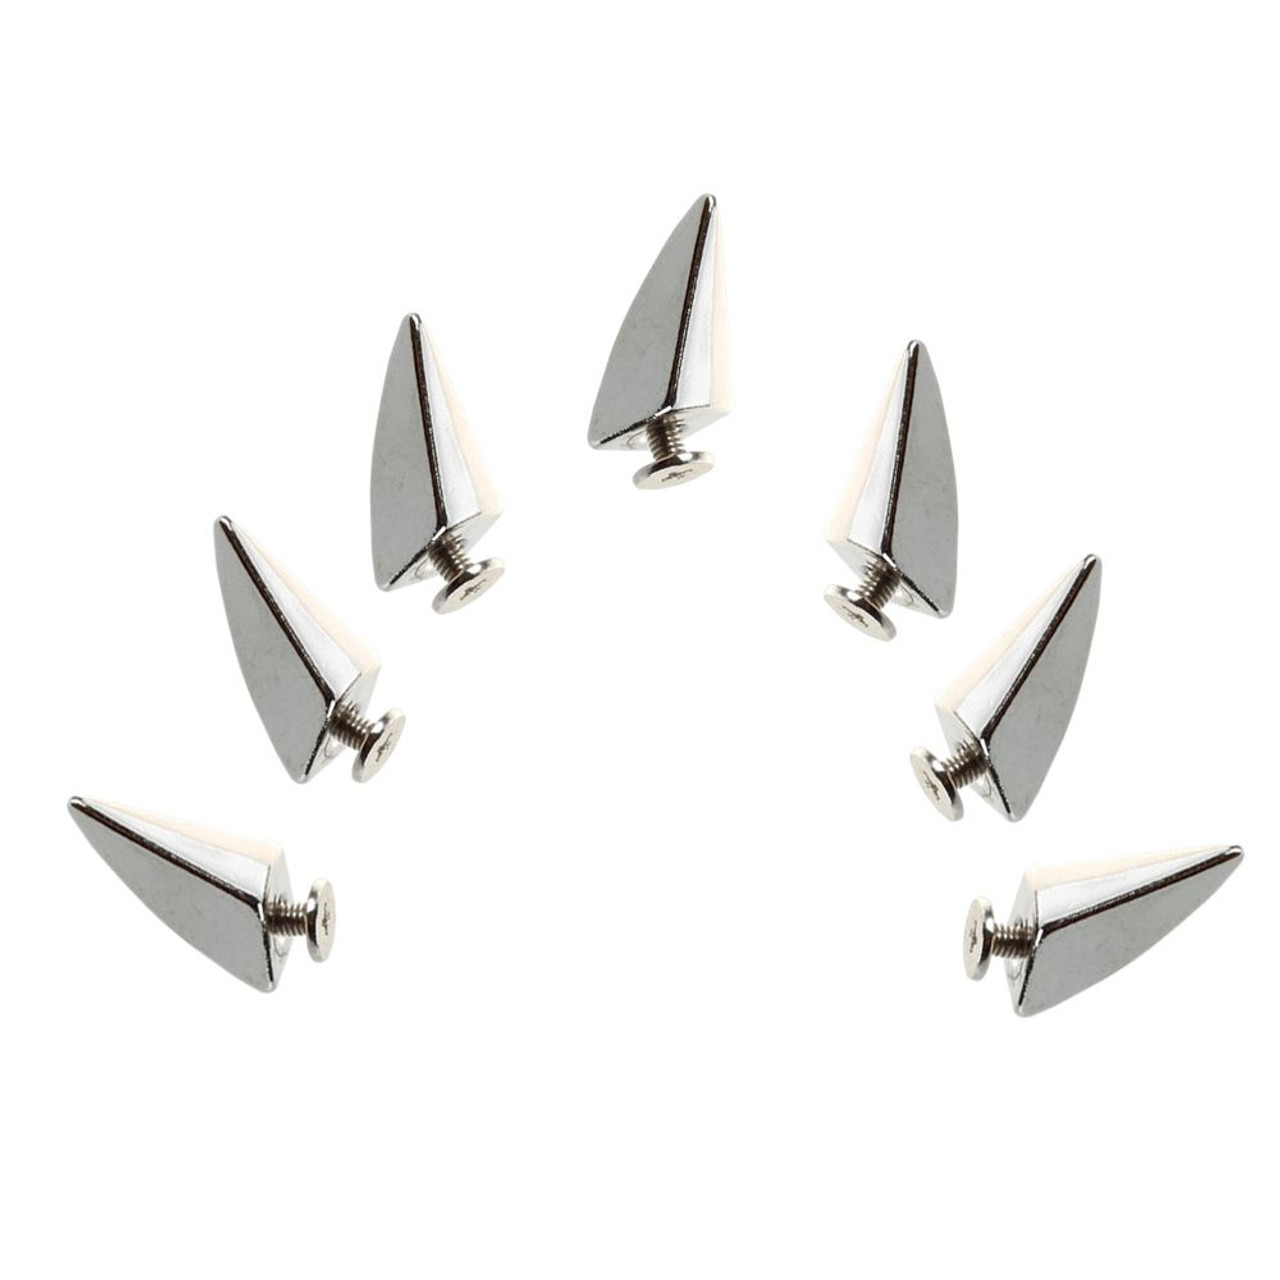 Metal Dragon Claw Cone Spike Studs with Back Screws, Silver - 10pcs